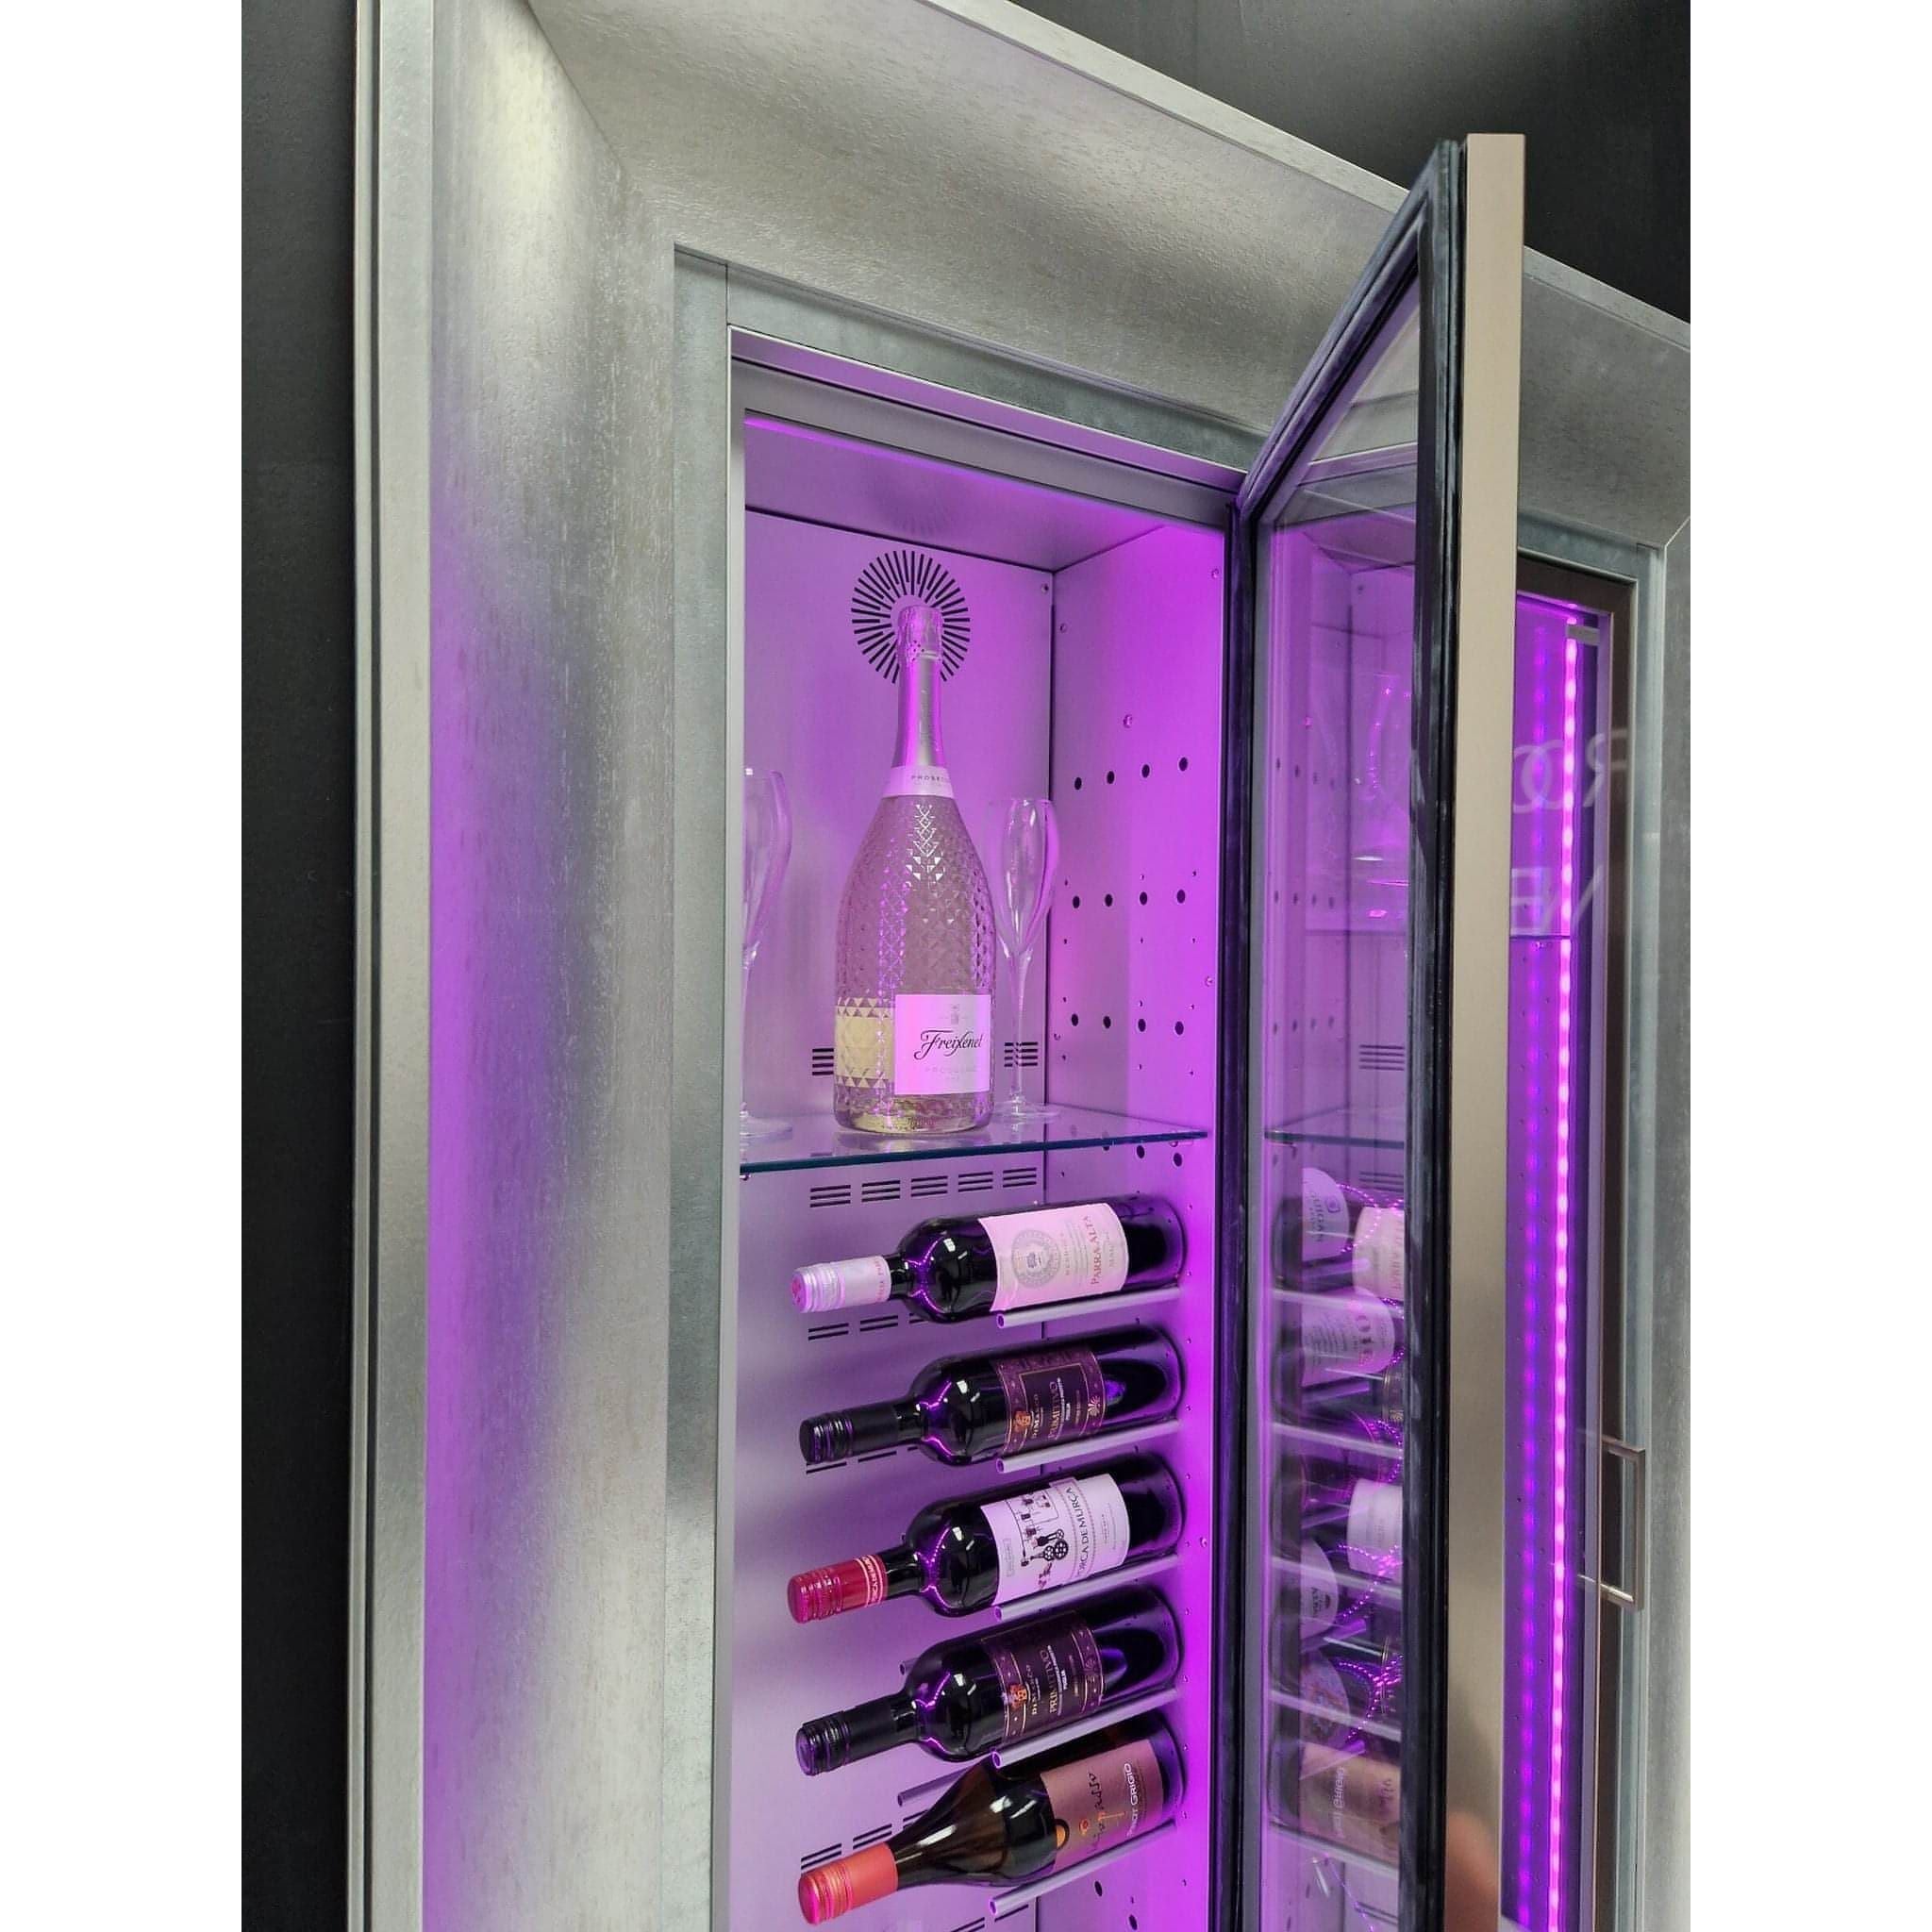 Mod 10 - Built in / Freestanding Wine Wall MD-12 - For Home Use